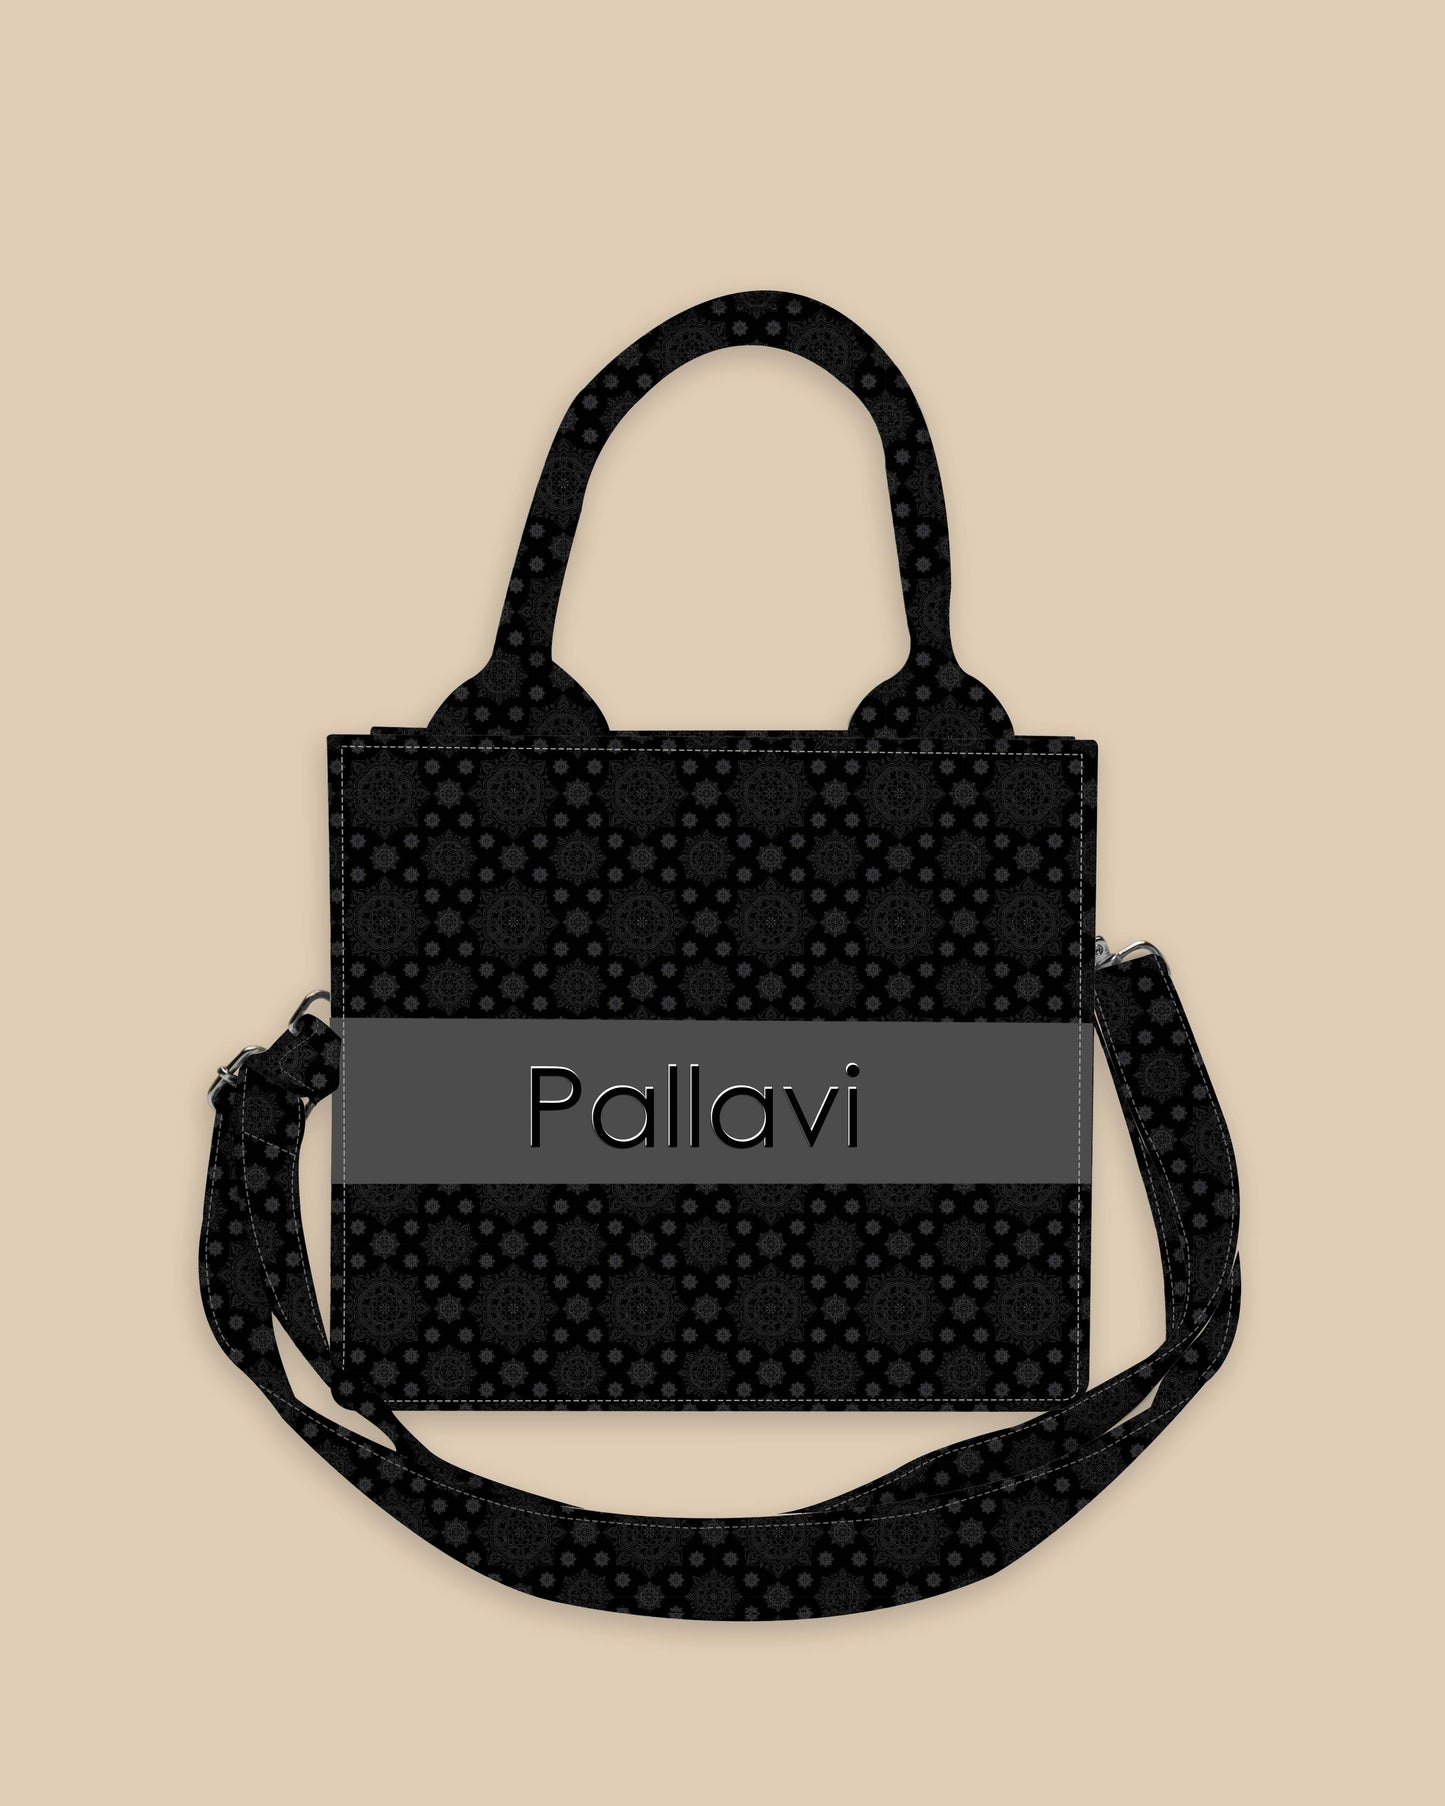 Customized Small Tote Bag Designed with Ornament Paisley Bandana